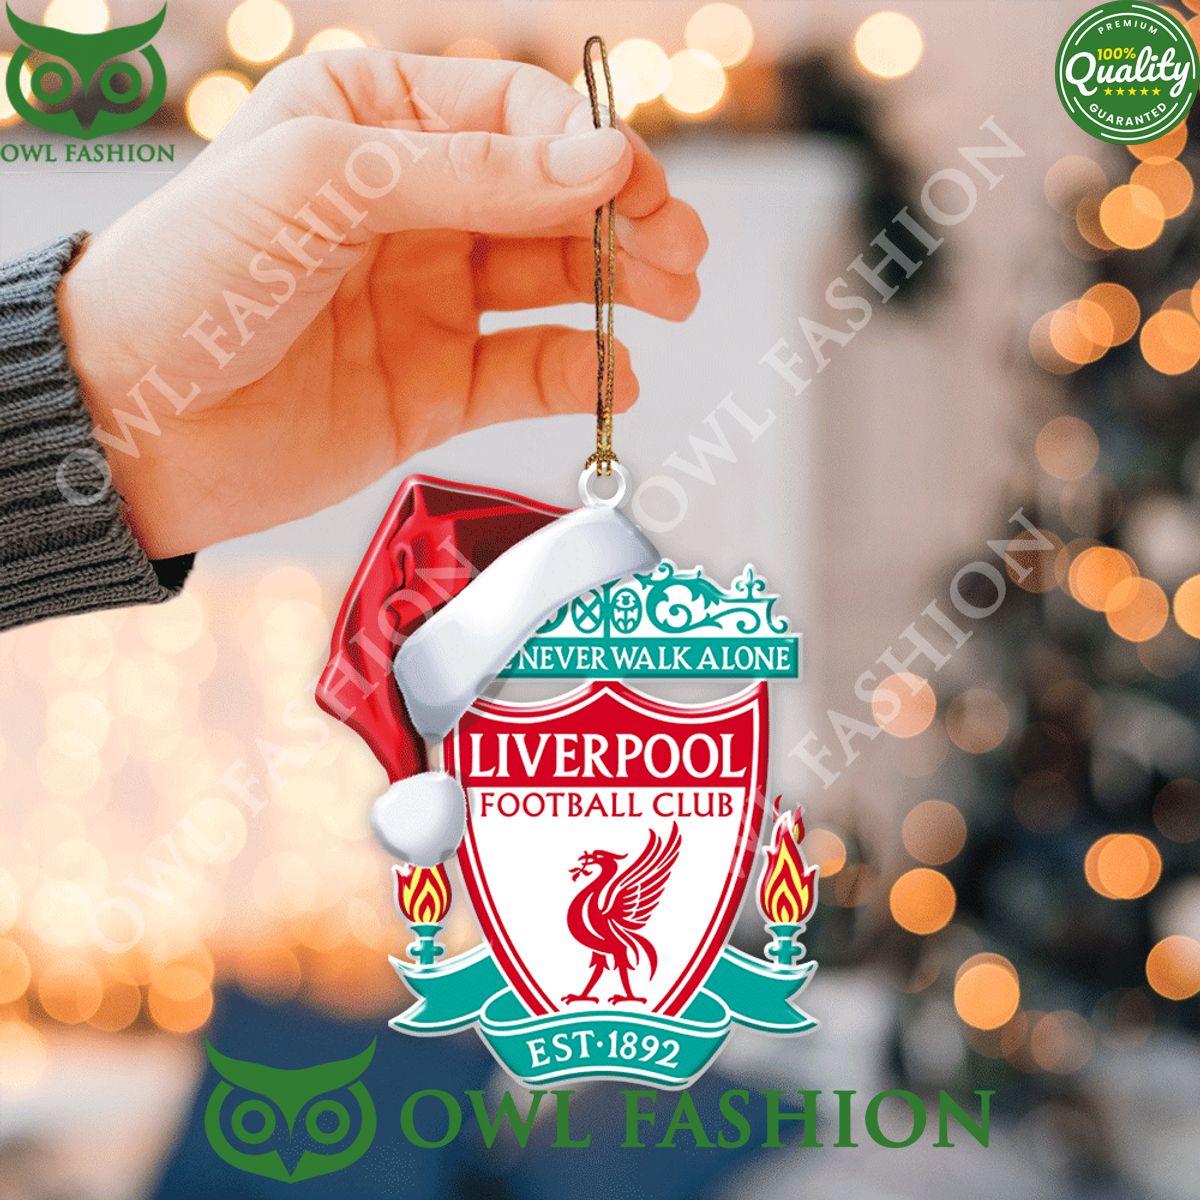 Liverpool Logo Christmas 2 Side Printed Ornament Wow! This is gracious